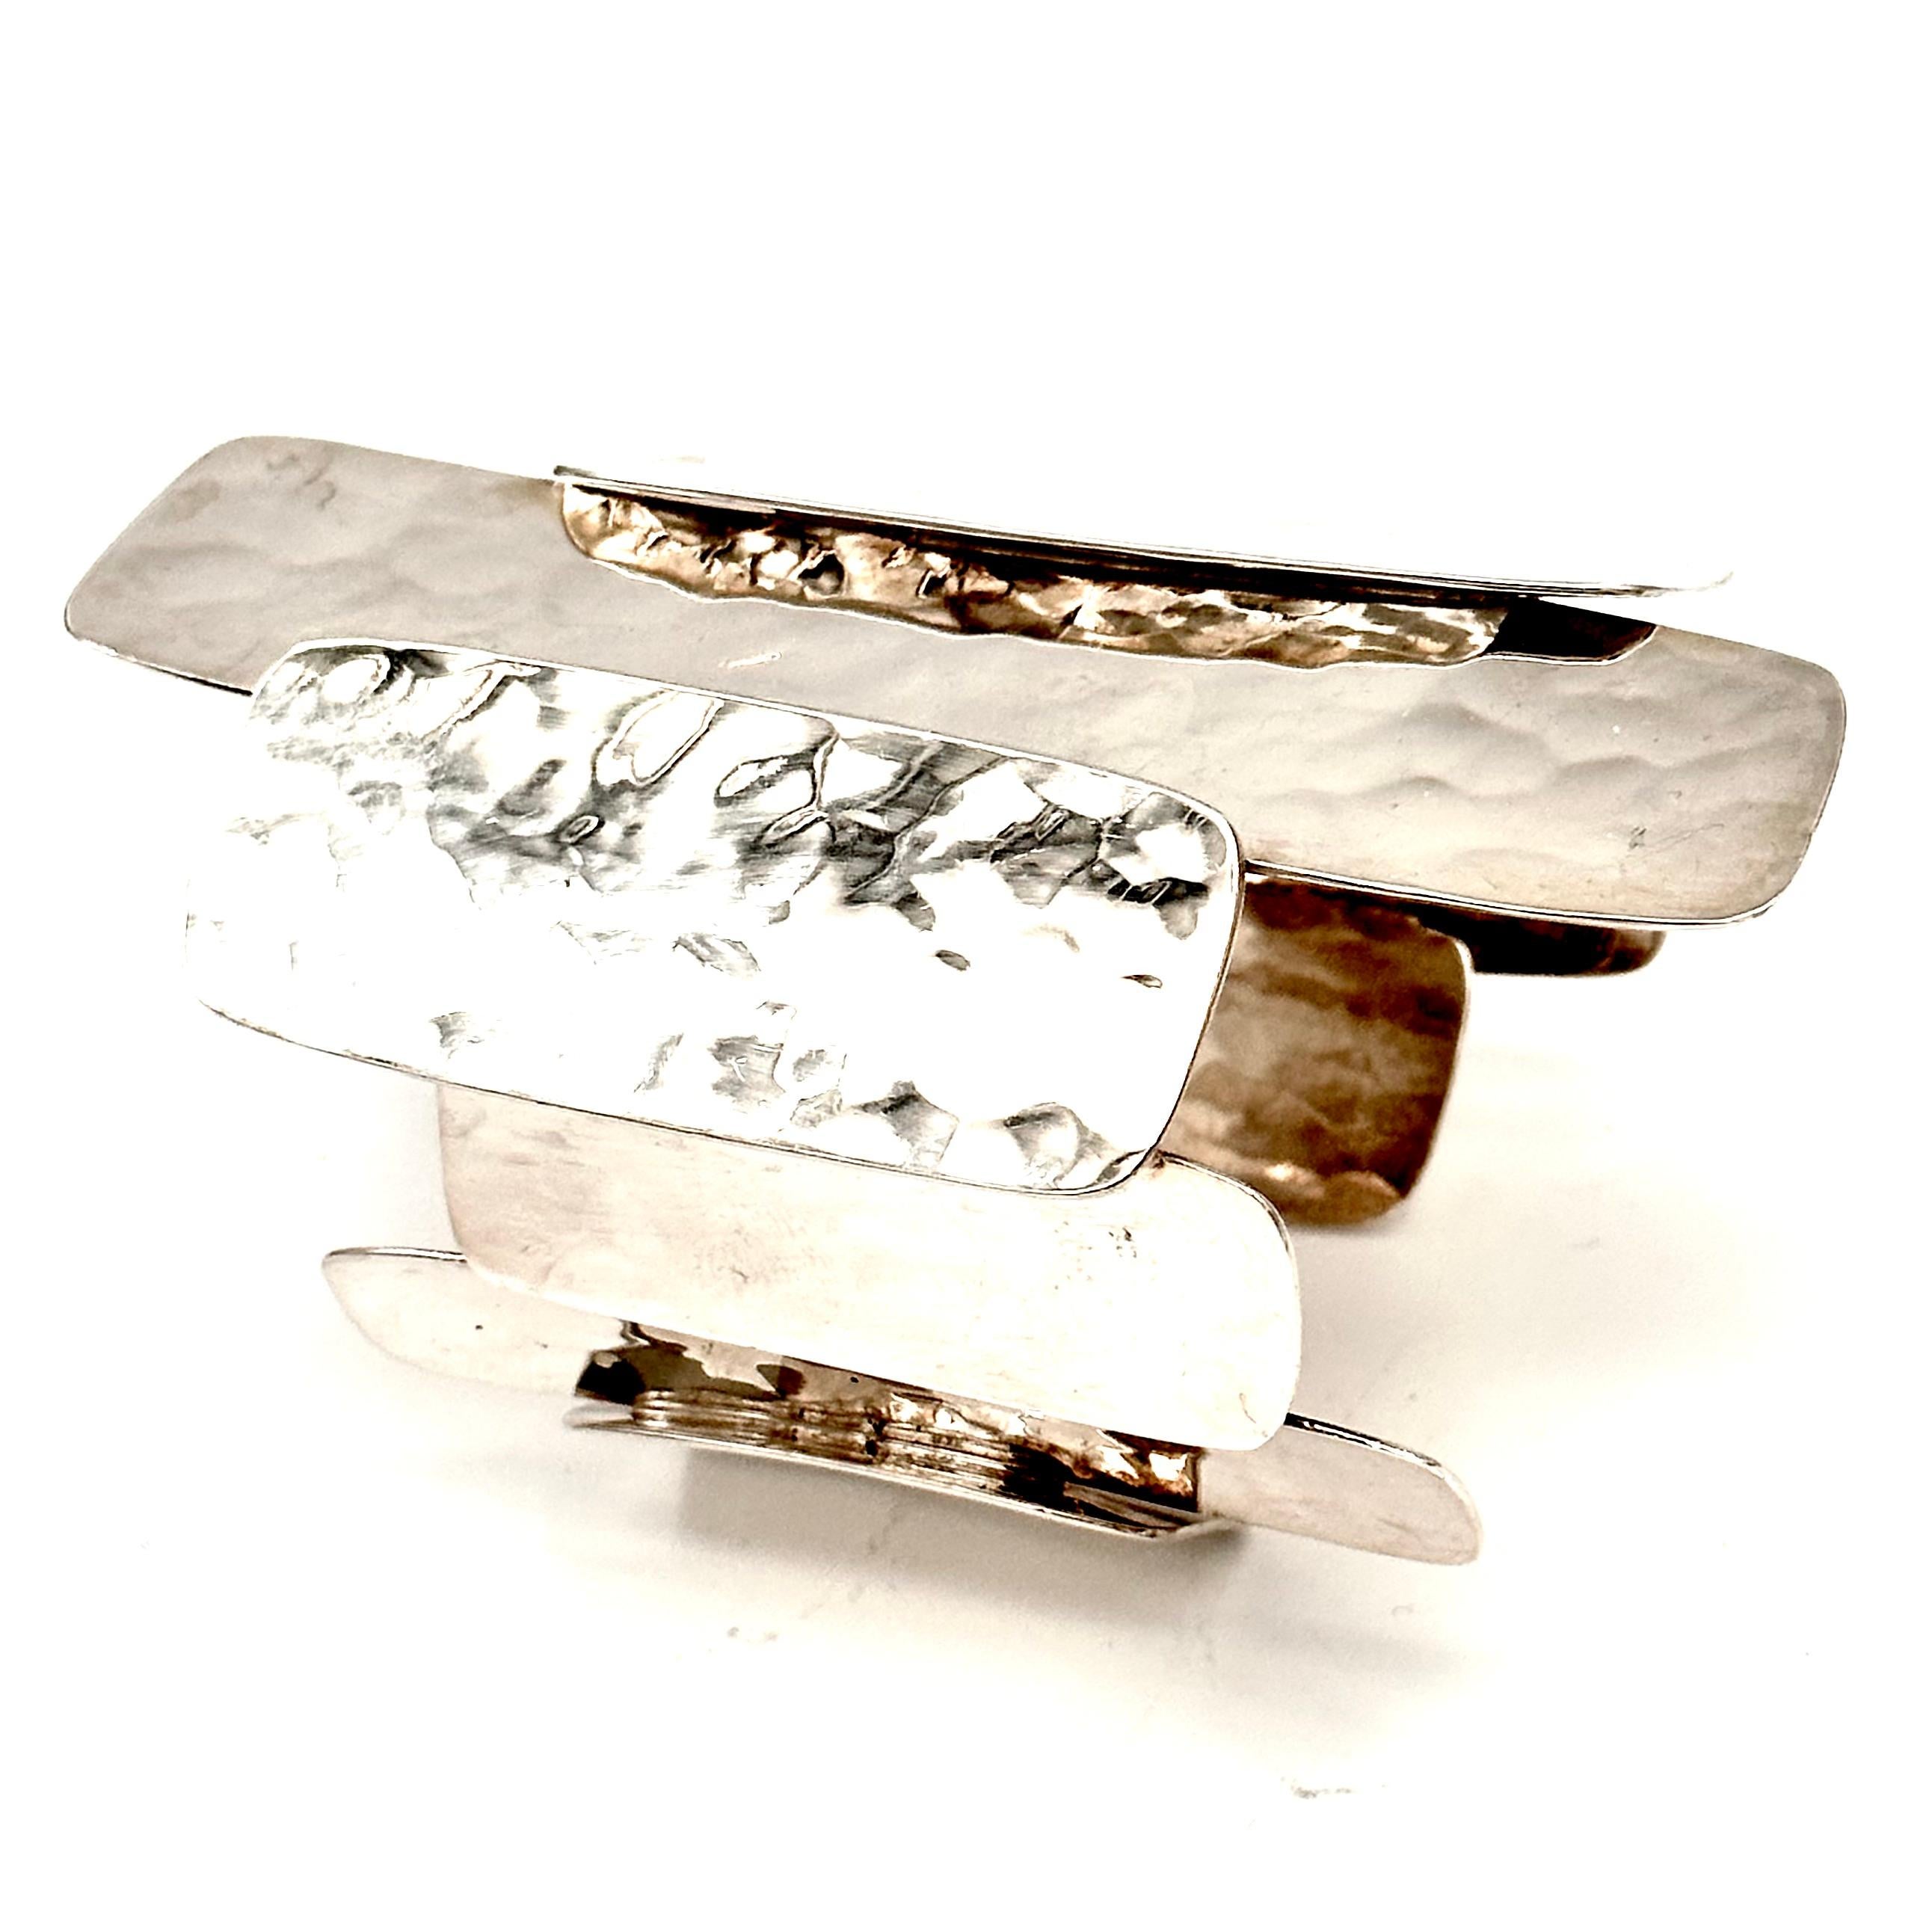 One of a kind Stegosaurus collection cuff, created with forged panels of sterling silver sheet. Easy to slip on to any size wrist, as the piece is flexible. The dramatic scale and hammered finish makes this piece a dazzling showstopper and statement